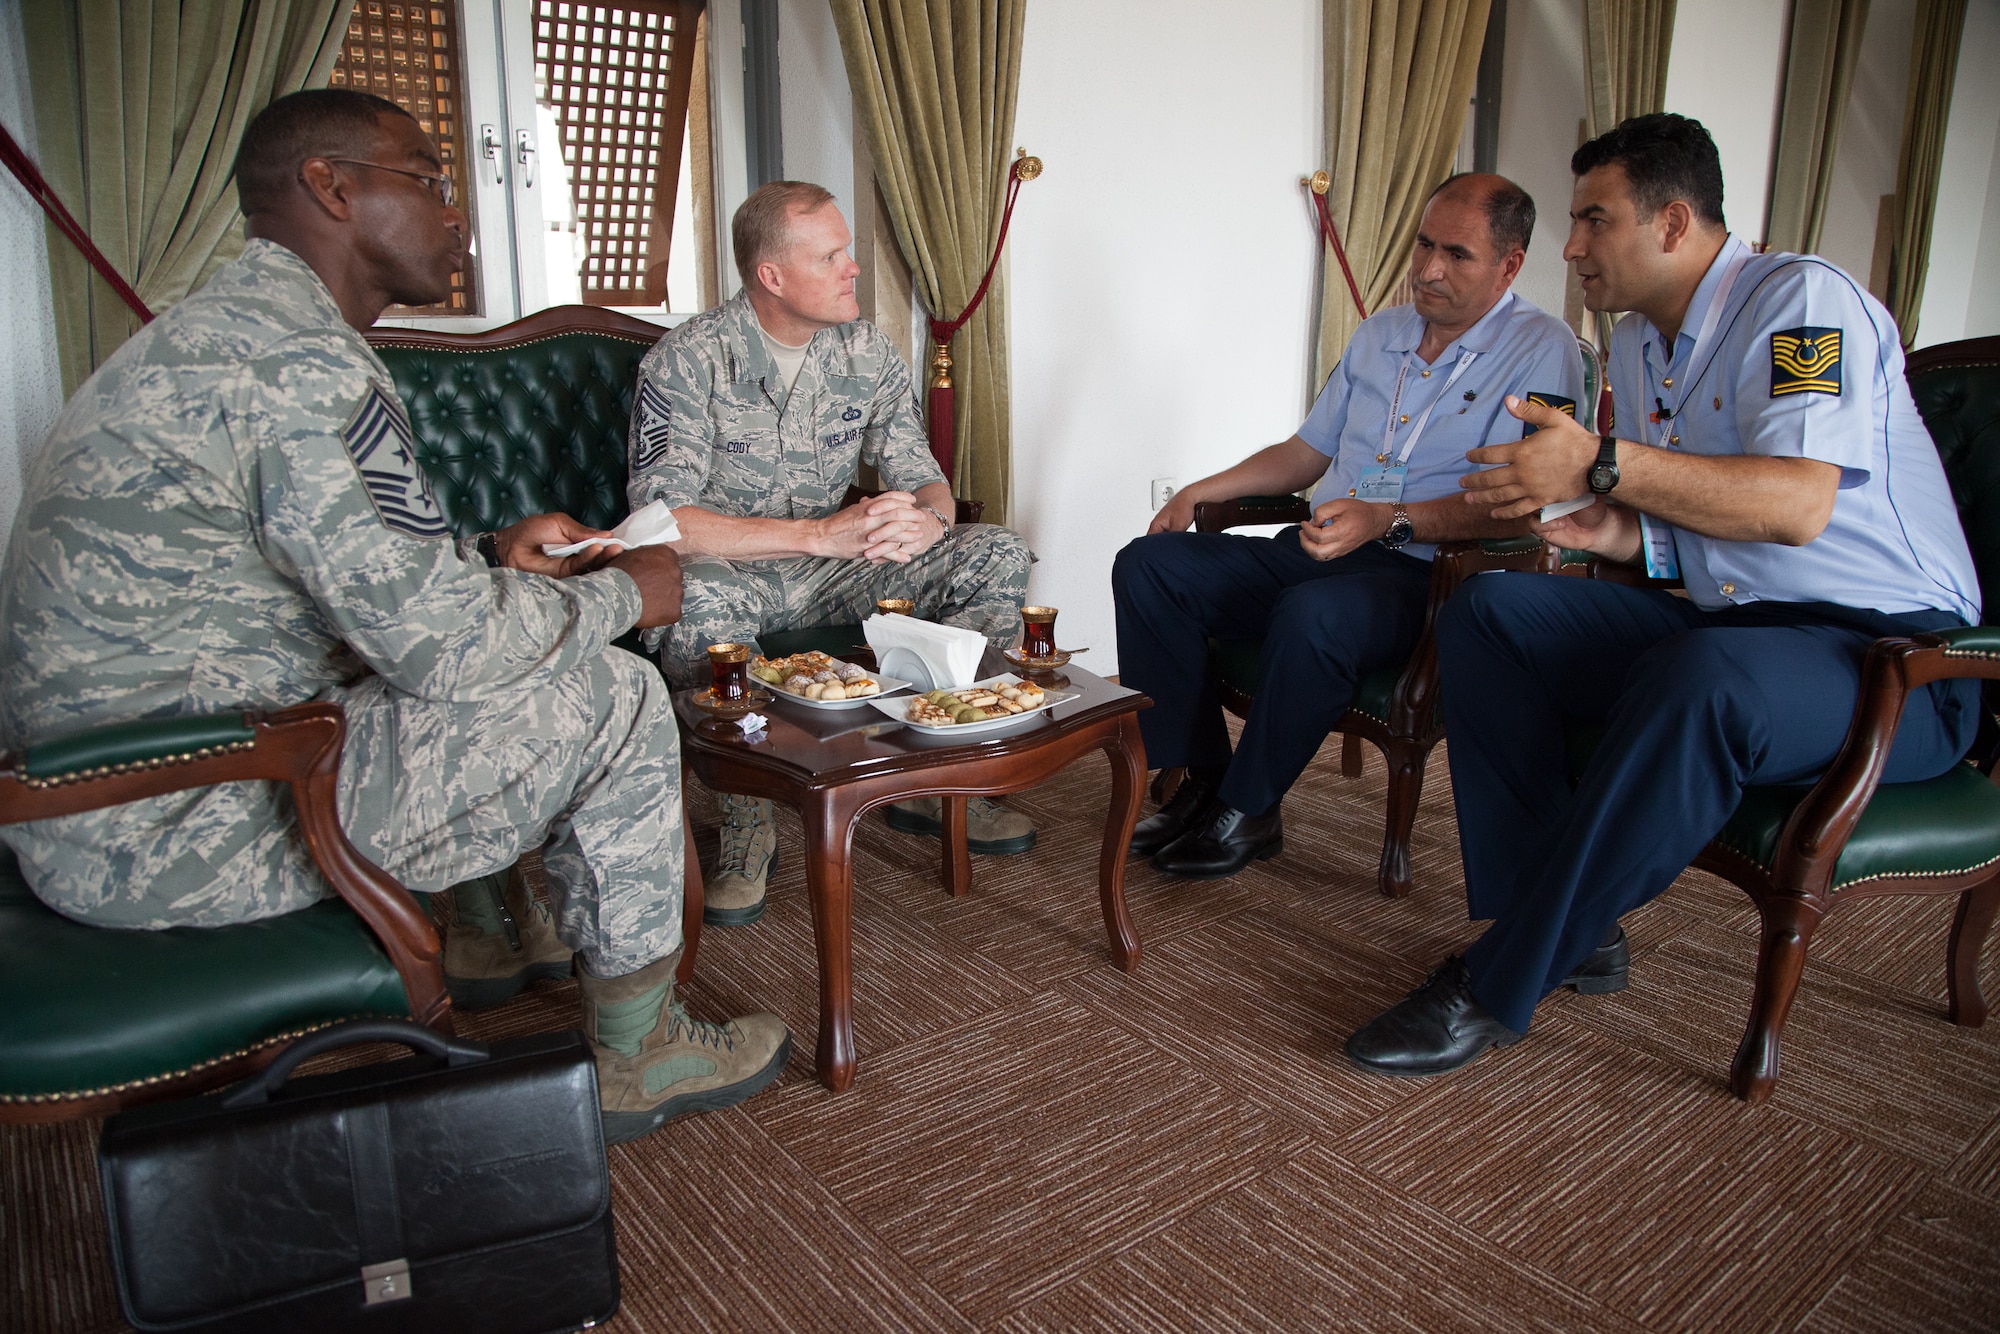 Chief Master Sgt. of the Air Force James A. Cody and Chief Master Sgt. James Davis discuss the role of NCOs with Turkish air force chief master sergeants, including Chief Master Sergeant of the Turkish air force Nazmi Harmanci (left) during the Turkish air force International NCO Symposium, June 9, 2014, in Istanbul, Turkey. Cody and Davis attended the symposium, which brought together the top senior enlisted Airmen from 20 air forces around the world to exchange ideas and enhance interoperability. Davis is the U.S. Air Forces in Europe and Air Forces Africa Command chief master sergeant. (U.S. Air Force photo/Senior Master Sgt. Lee E. Hoover Jr.)